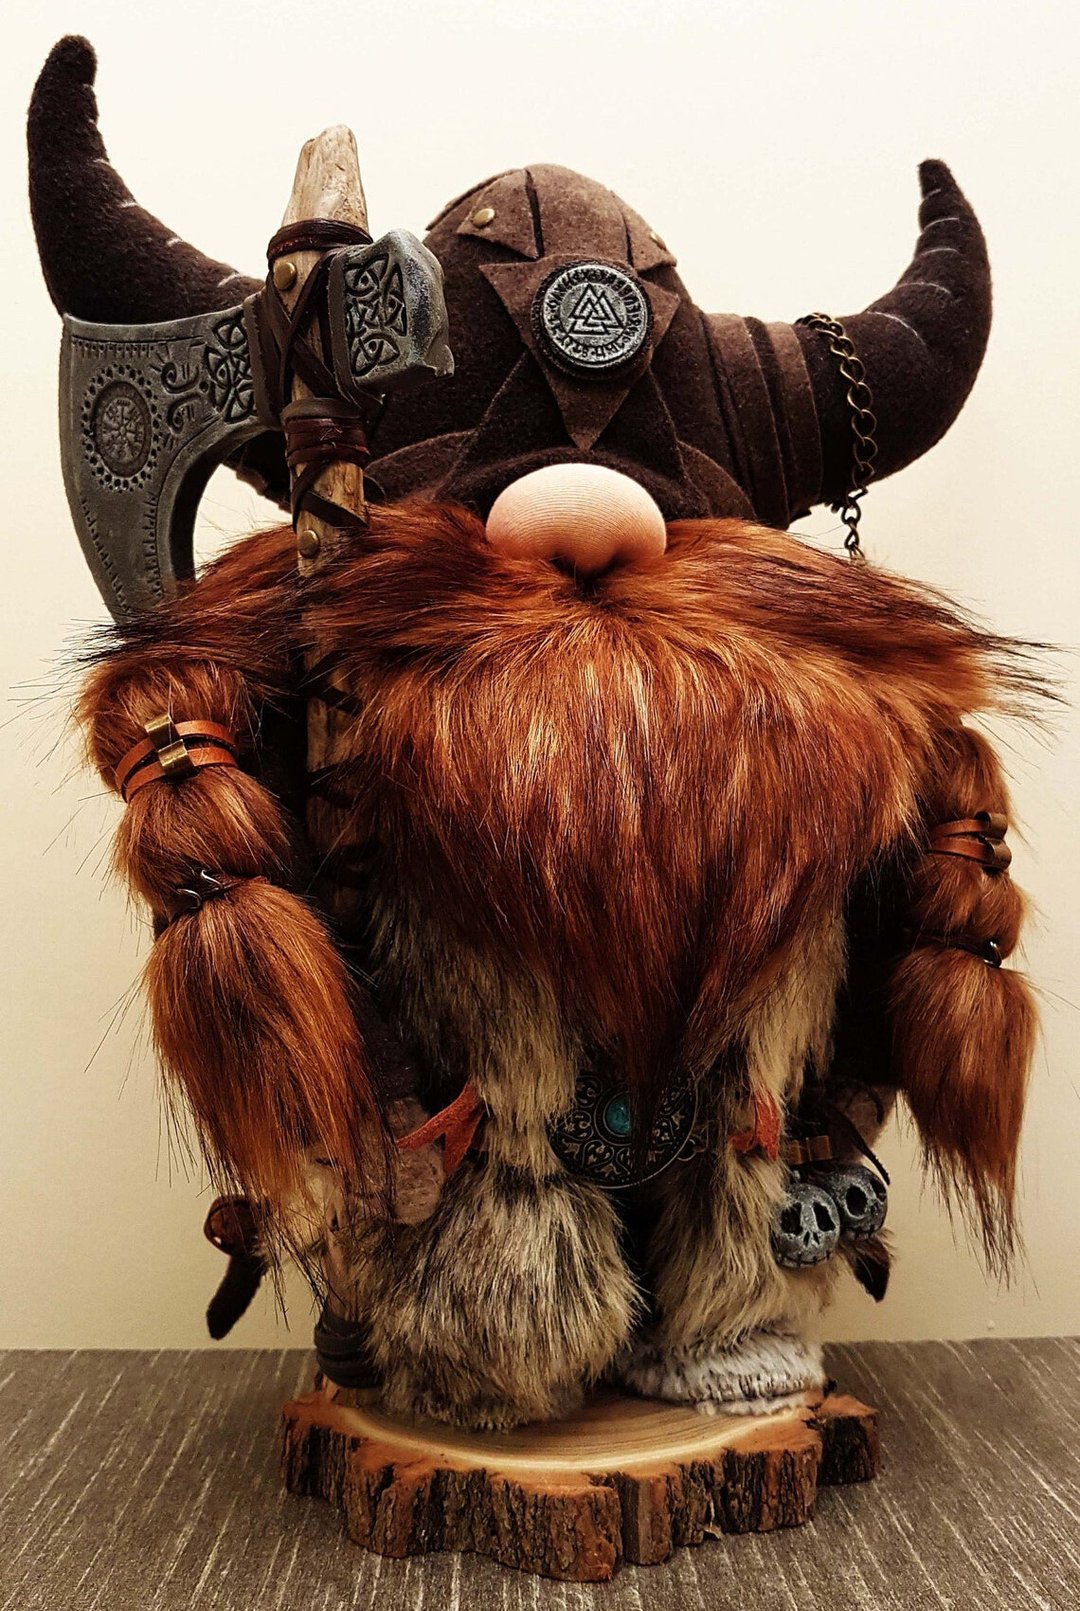 🔥Limit discounts🔥Viking Warrior Gnome doll【BUY 2 FREE SHIPPING】